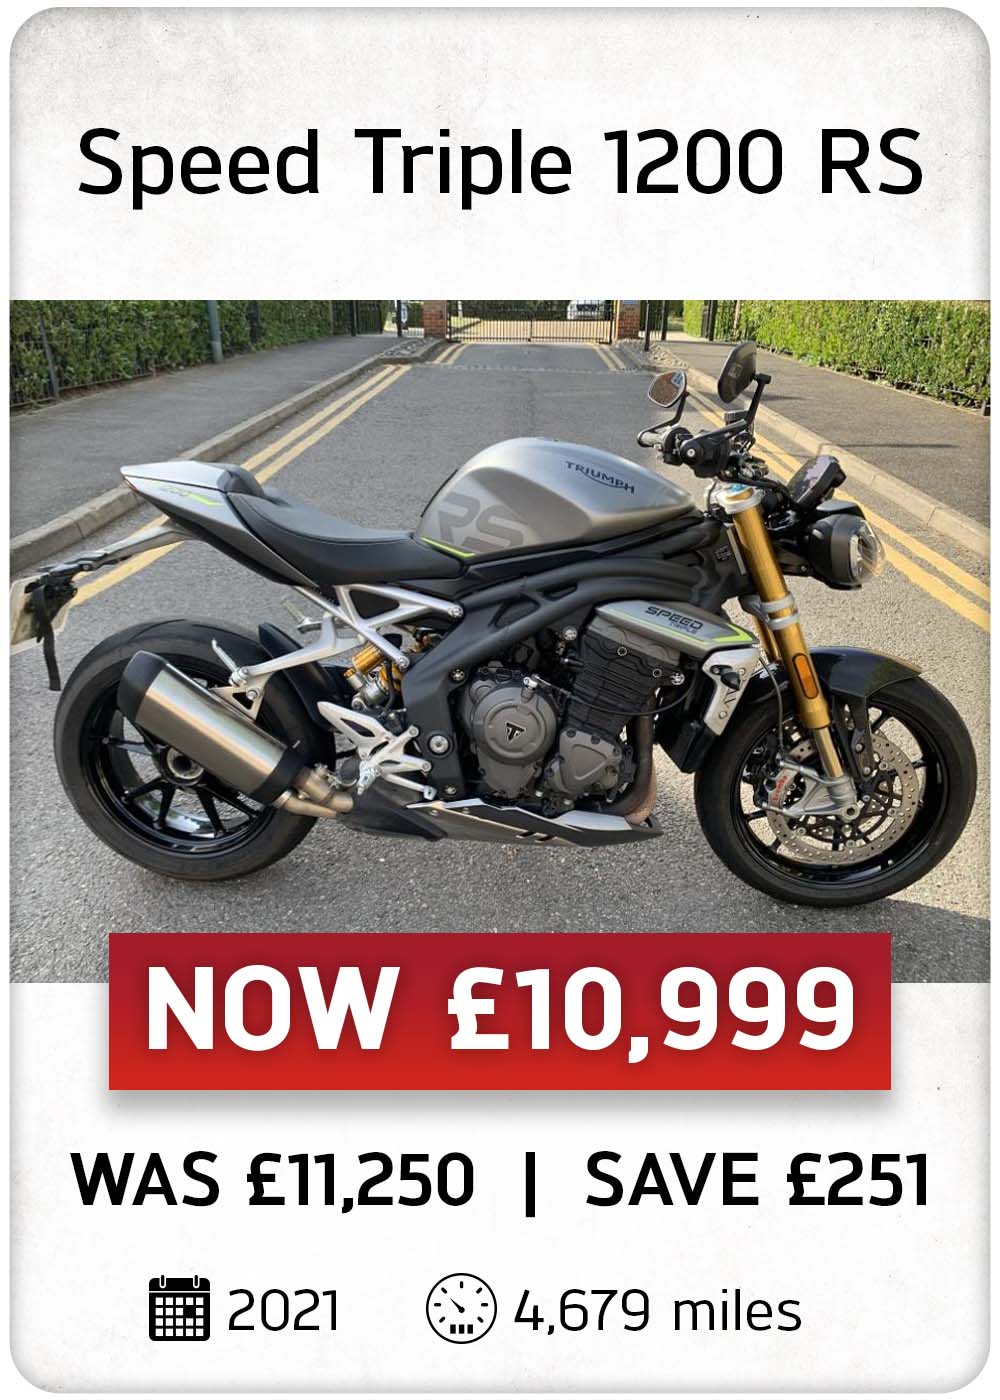 Triumph SPEED TRIPLE 1200 RS for sale in our Used Bike Specials at Laguna Motorcycles in Maidstone